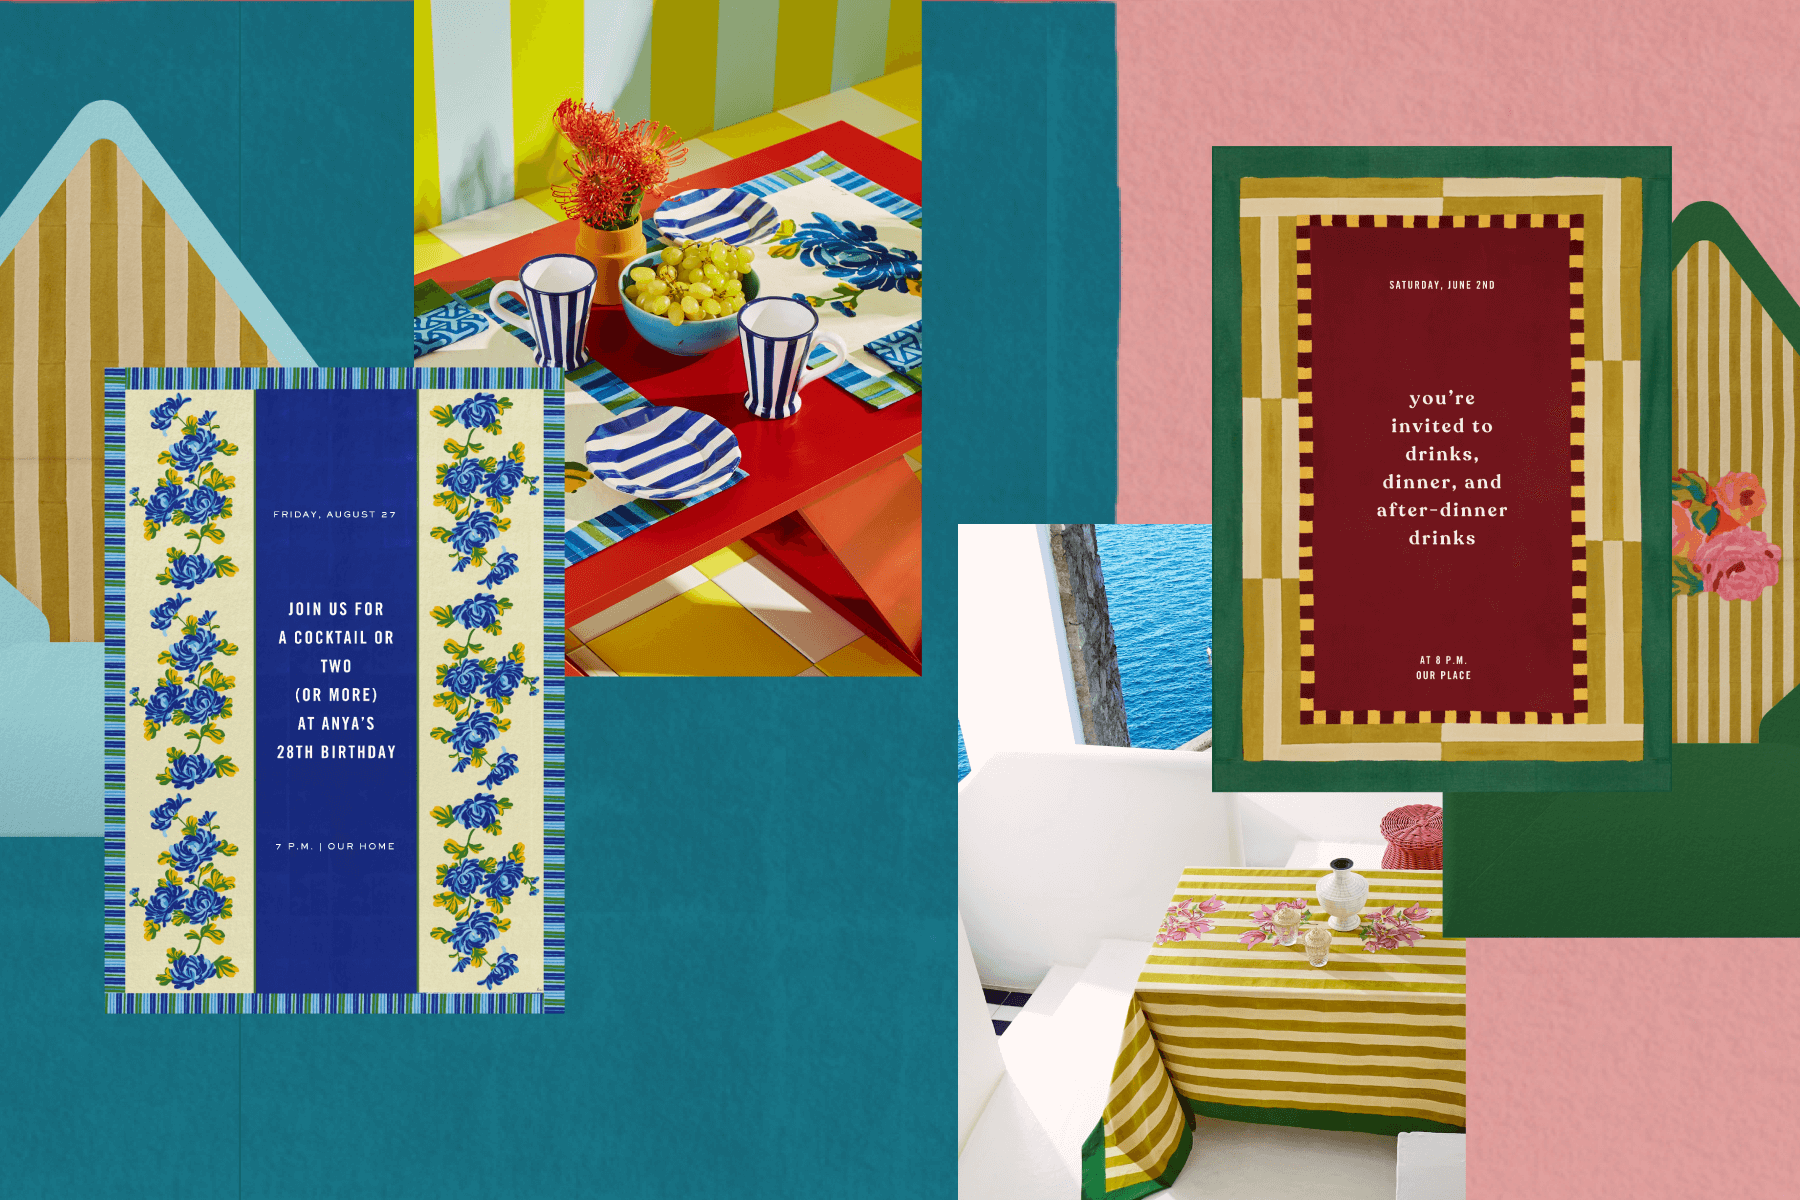 Left: Invitation with a blue stripe down the middle and two off white side stripes that feature floral designs. Right: Invitation with a maroon background and a green and off-white graphic border. 